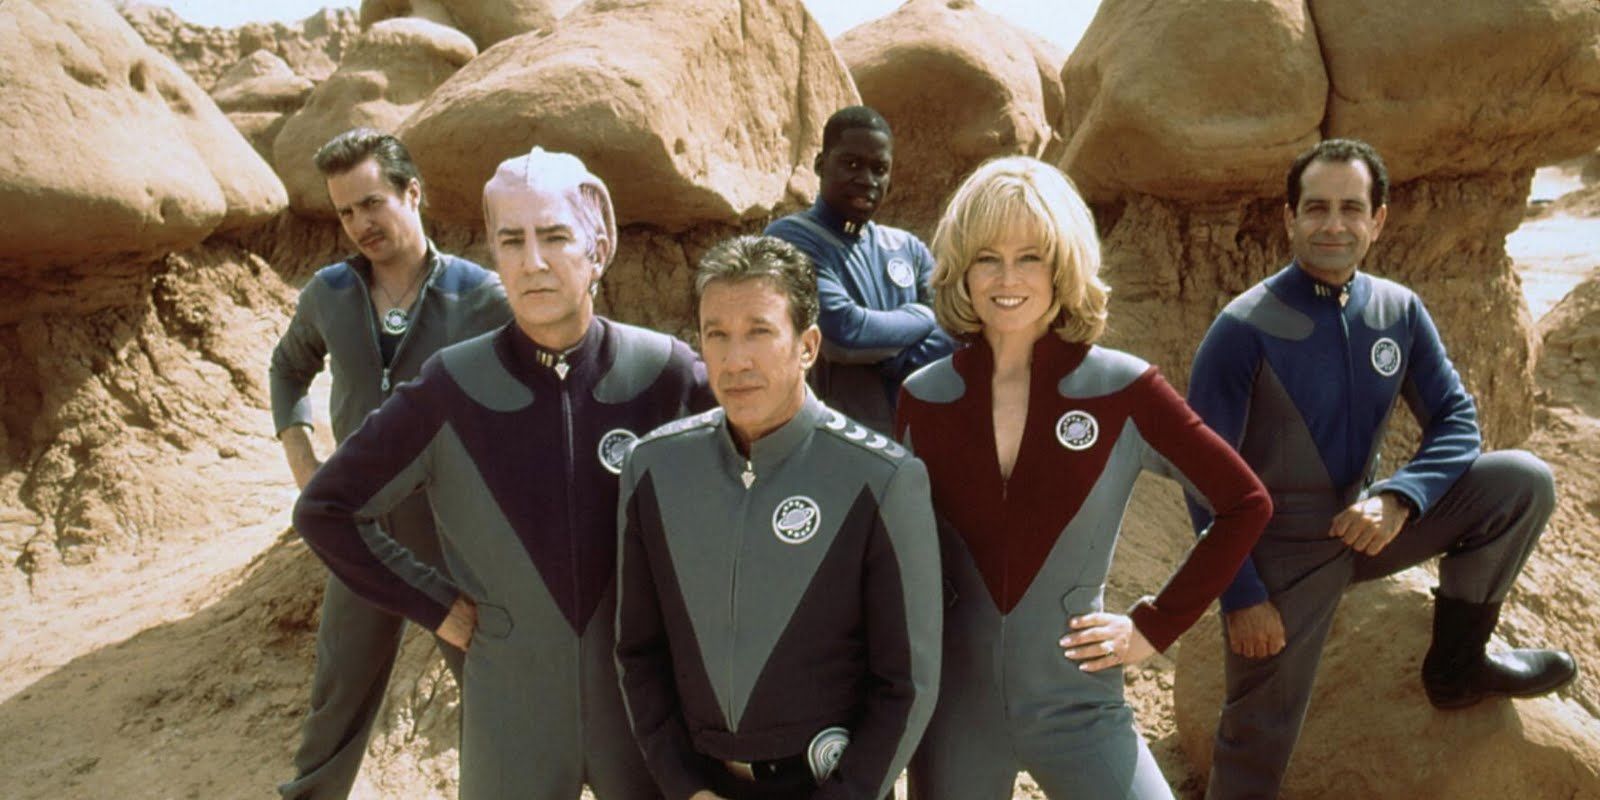 The cast of Galaxy Quest pose for a promotional image